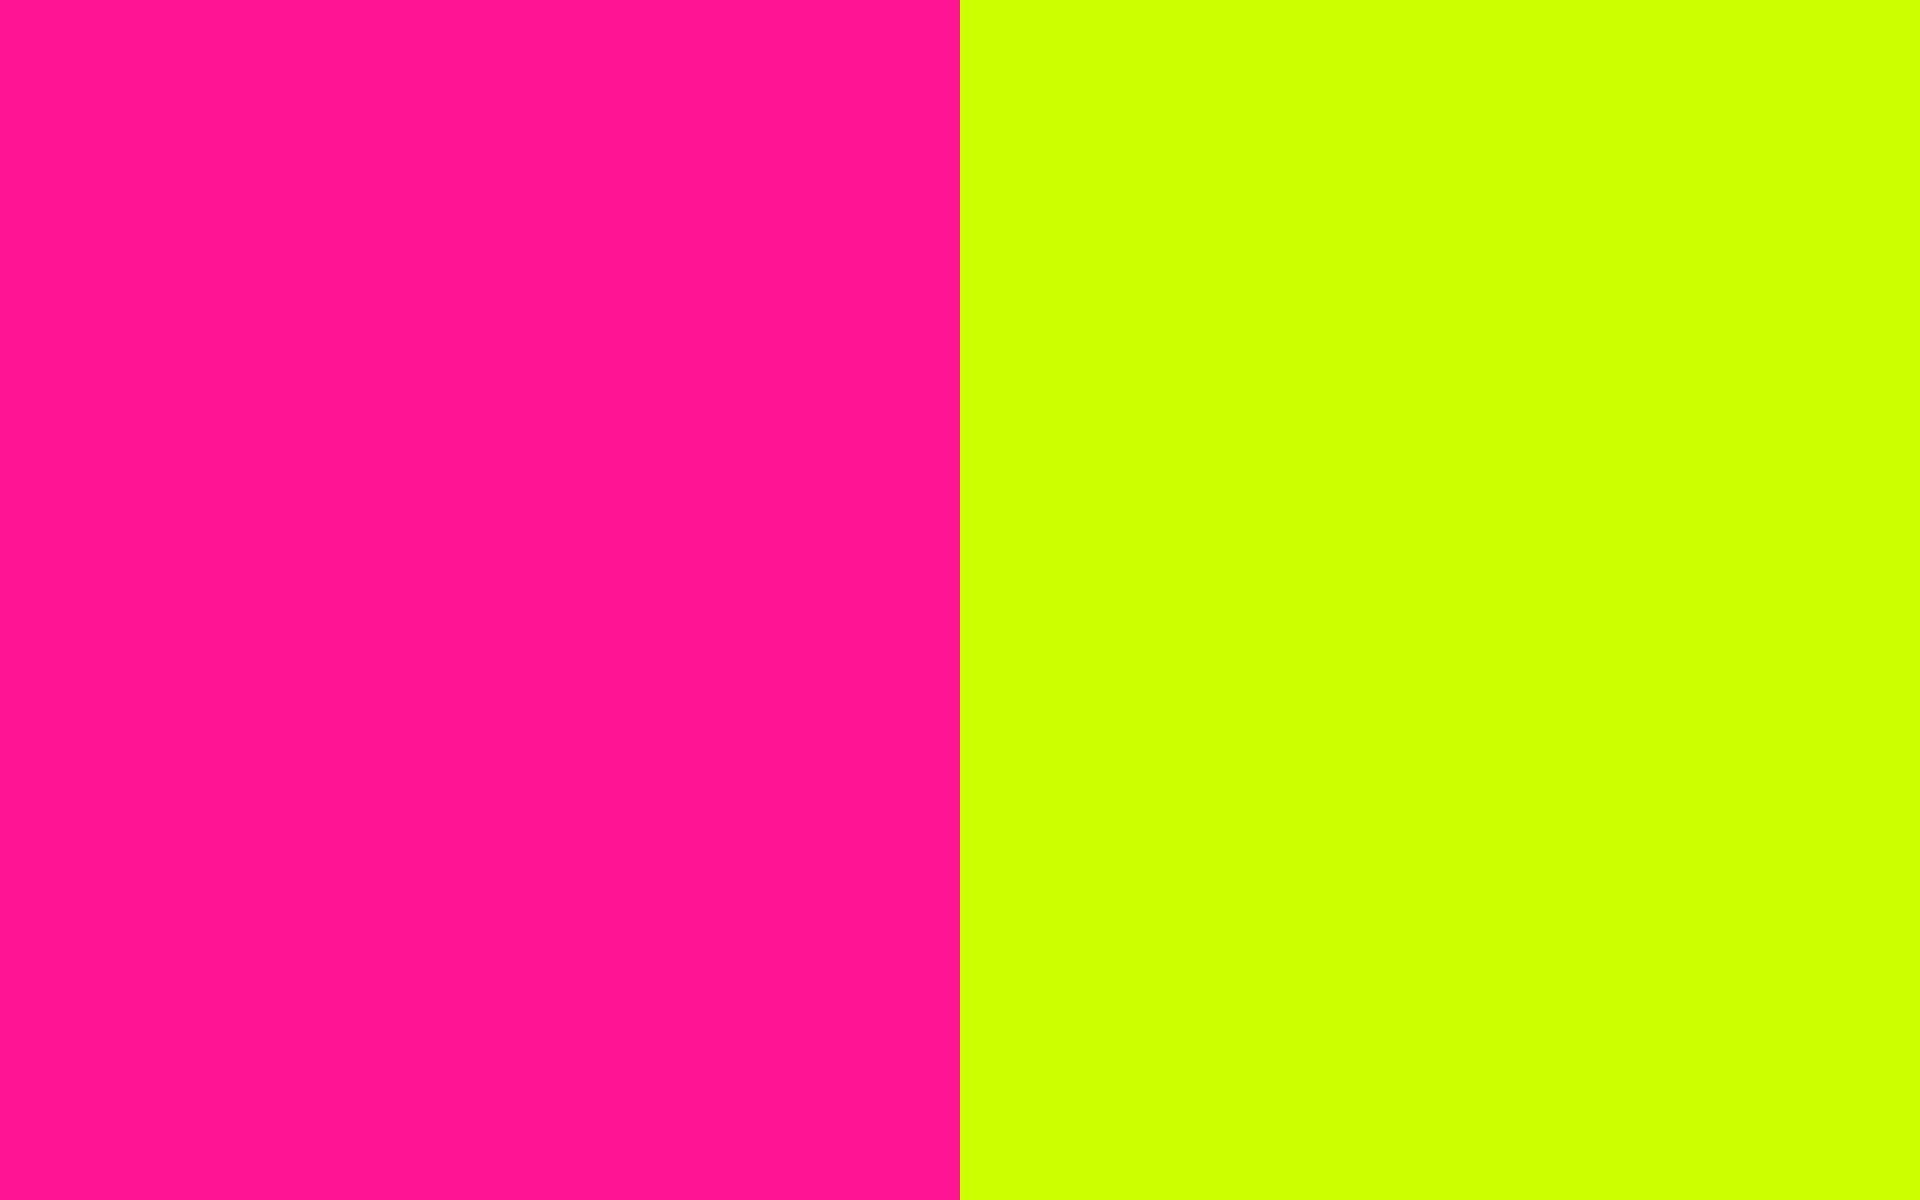 1920x1200 Fluorescent Pink Fluorescent Yellow Two Color Coloring Wallpapers Download Free Images Wallpaper [coloring365.blogspot.com]